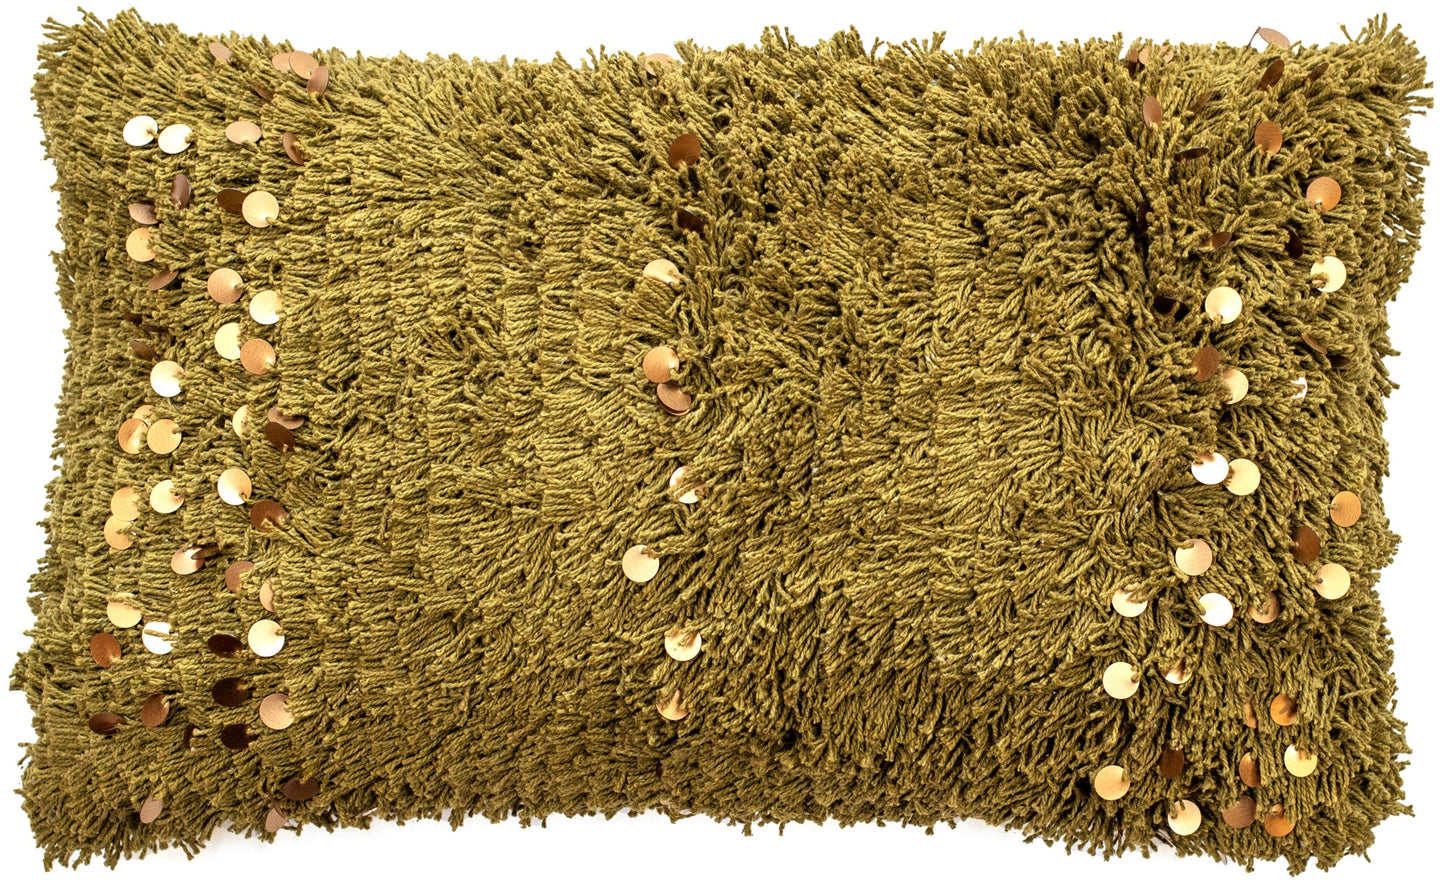 TEXTURED MOROCCON SEQUIN CUSHION OLIVE  30 X 50

Size: 30 X 50 cm